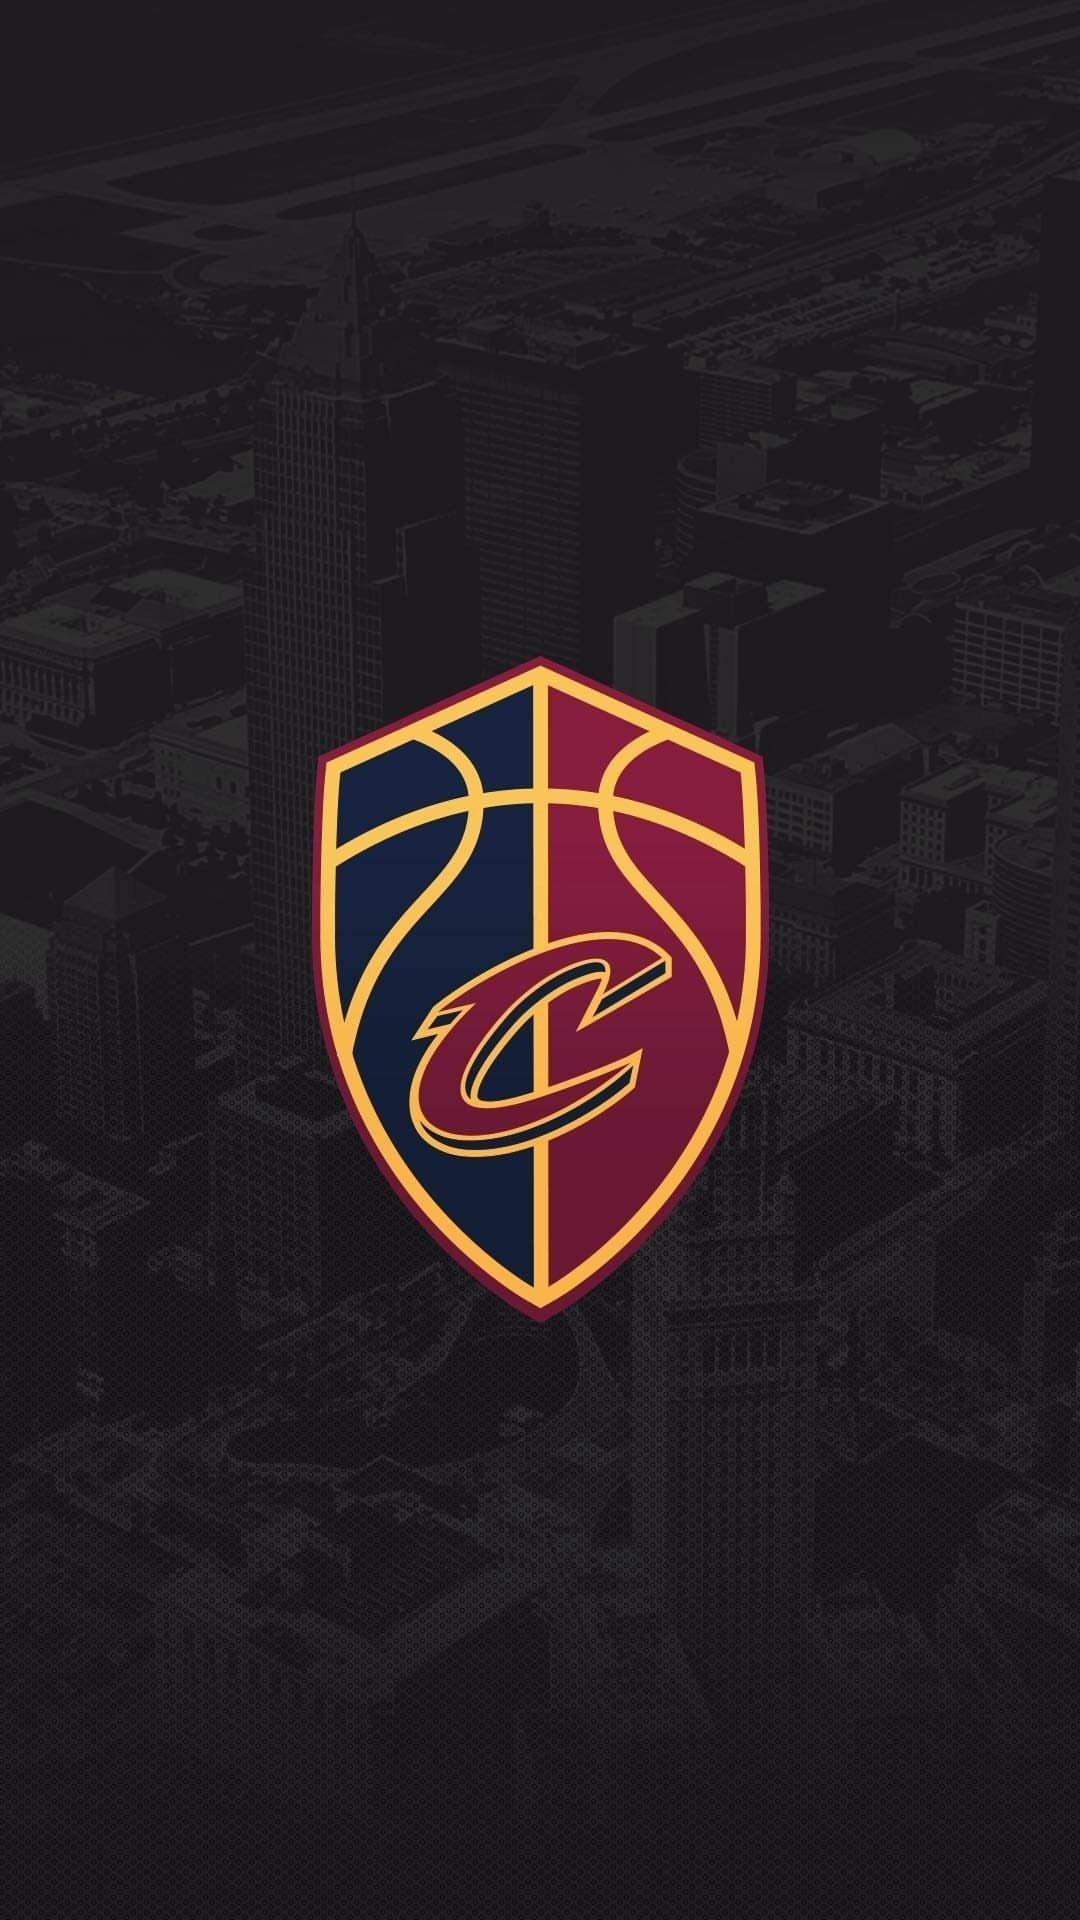 Cleveland Cavaliers: The team reached the Eastern Conference Finals in 1991–92 season. 1080x1920 Full HD Wallpaper.